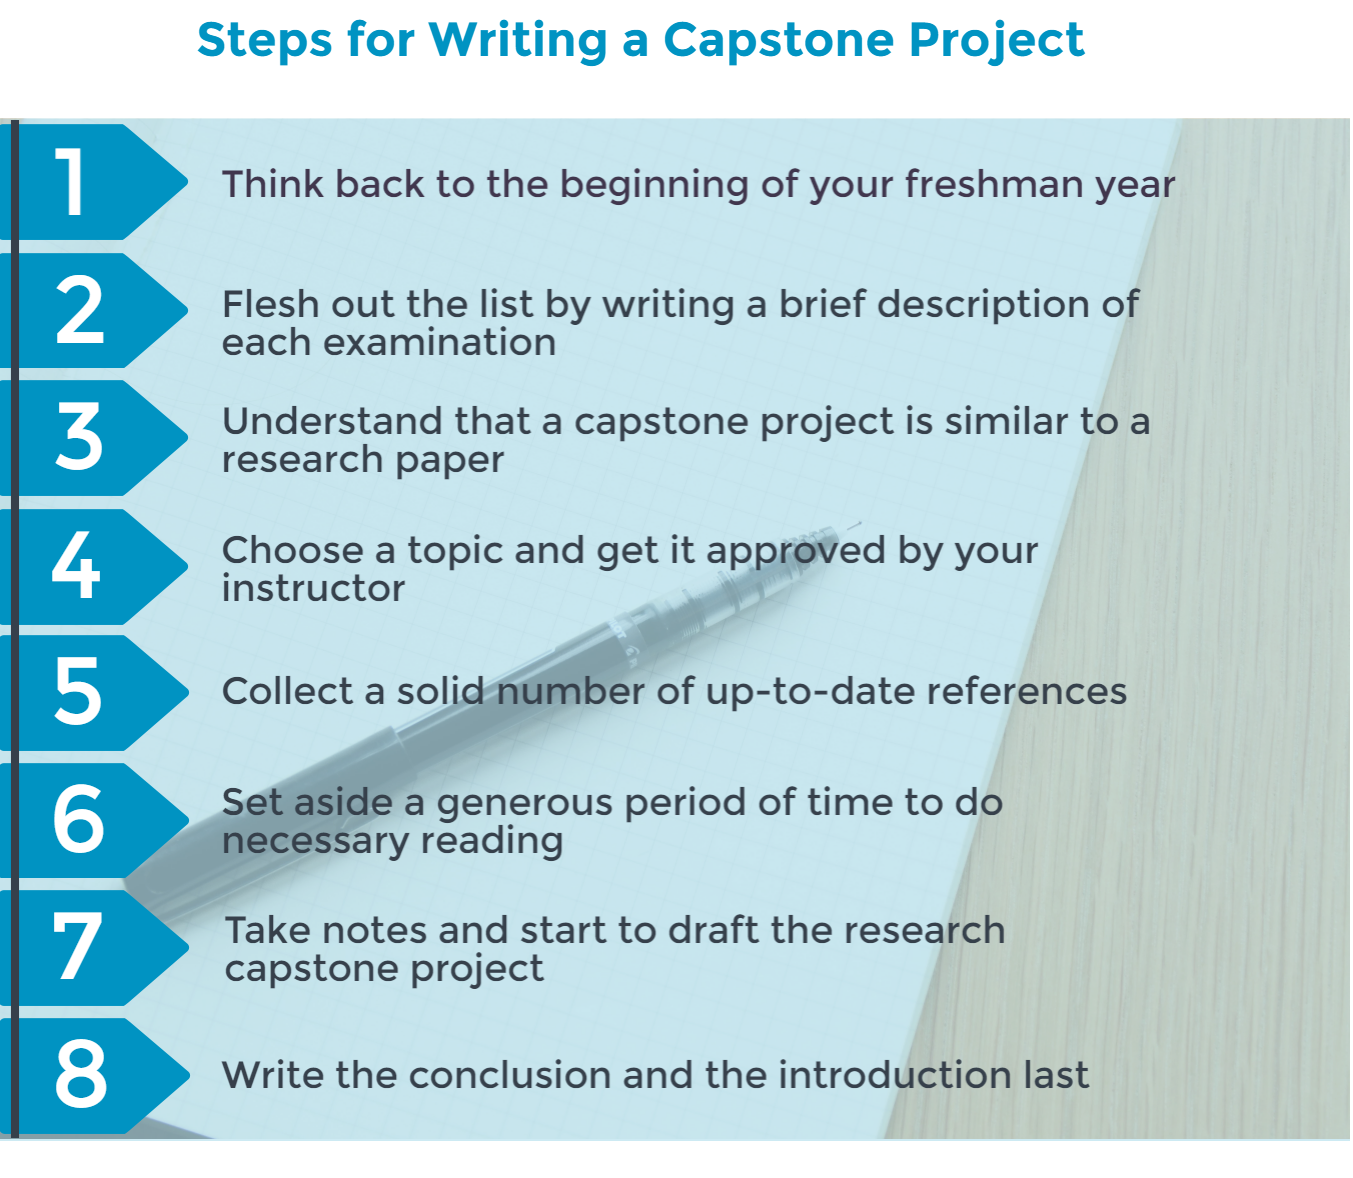 Capstone Project Proposal Format: Guide to Write Good Capstone